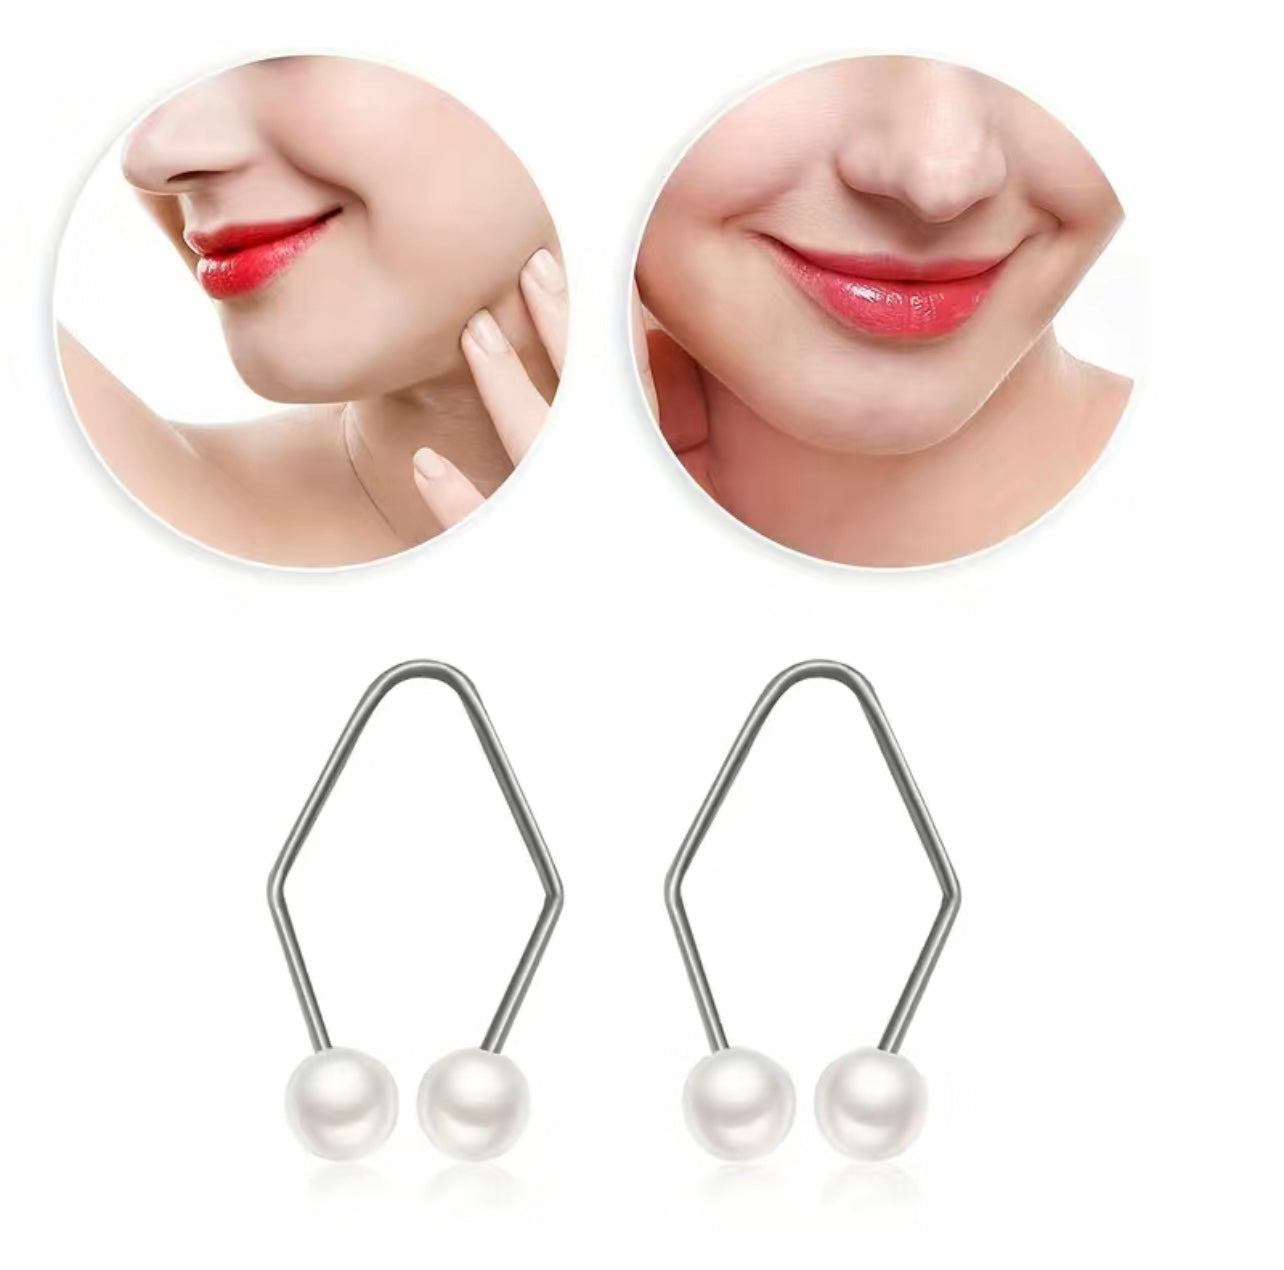 Dimple maker, at home dimples, dimple surgery, non surgical dimples, how to create dimples, dimple surgery near me, crest dimples in my face, TikTok viral products, TikTok dupes, TikTok made me buy it, TikTok shop products, Body Sculpting 